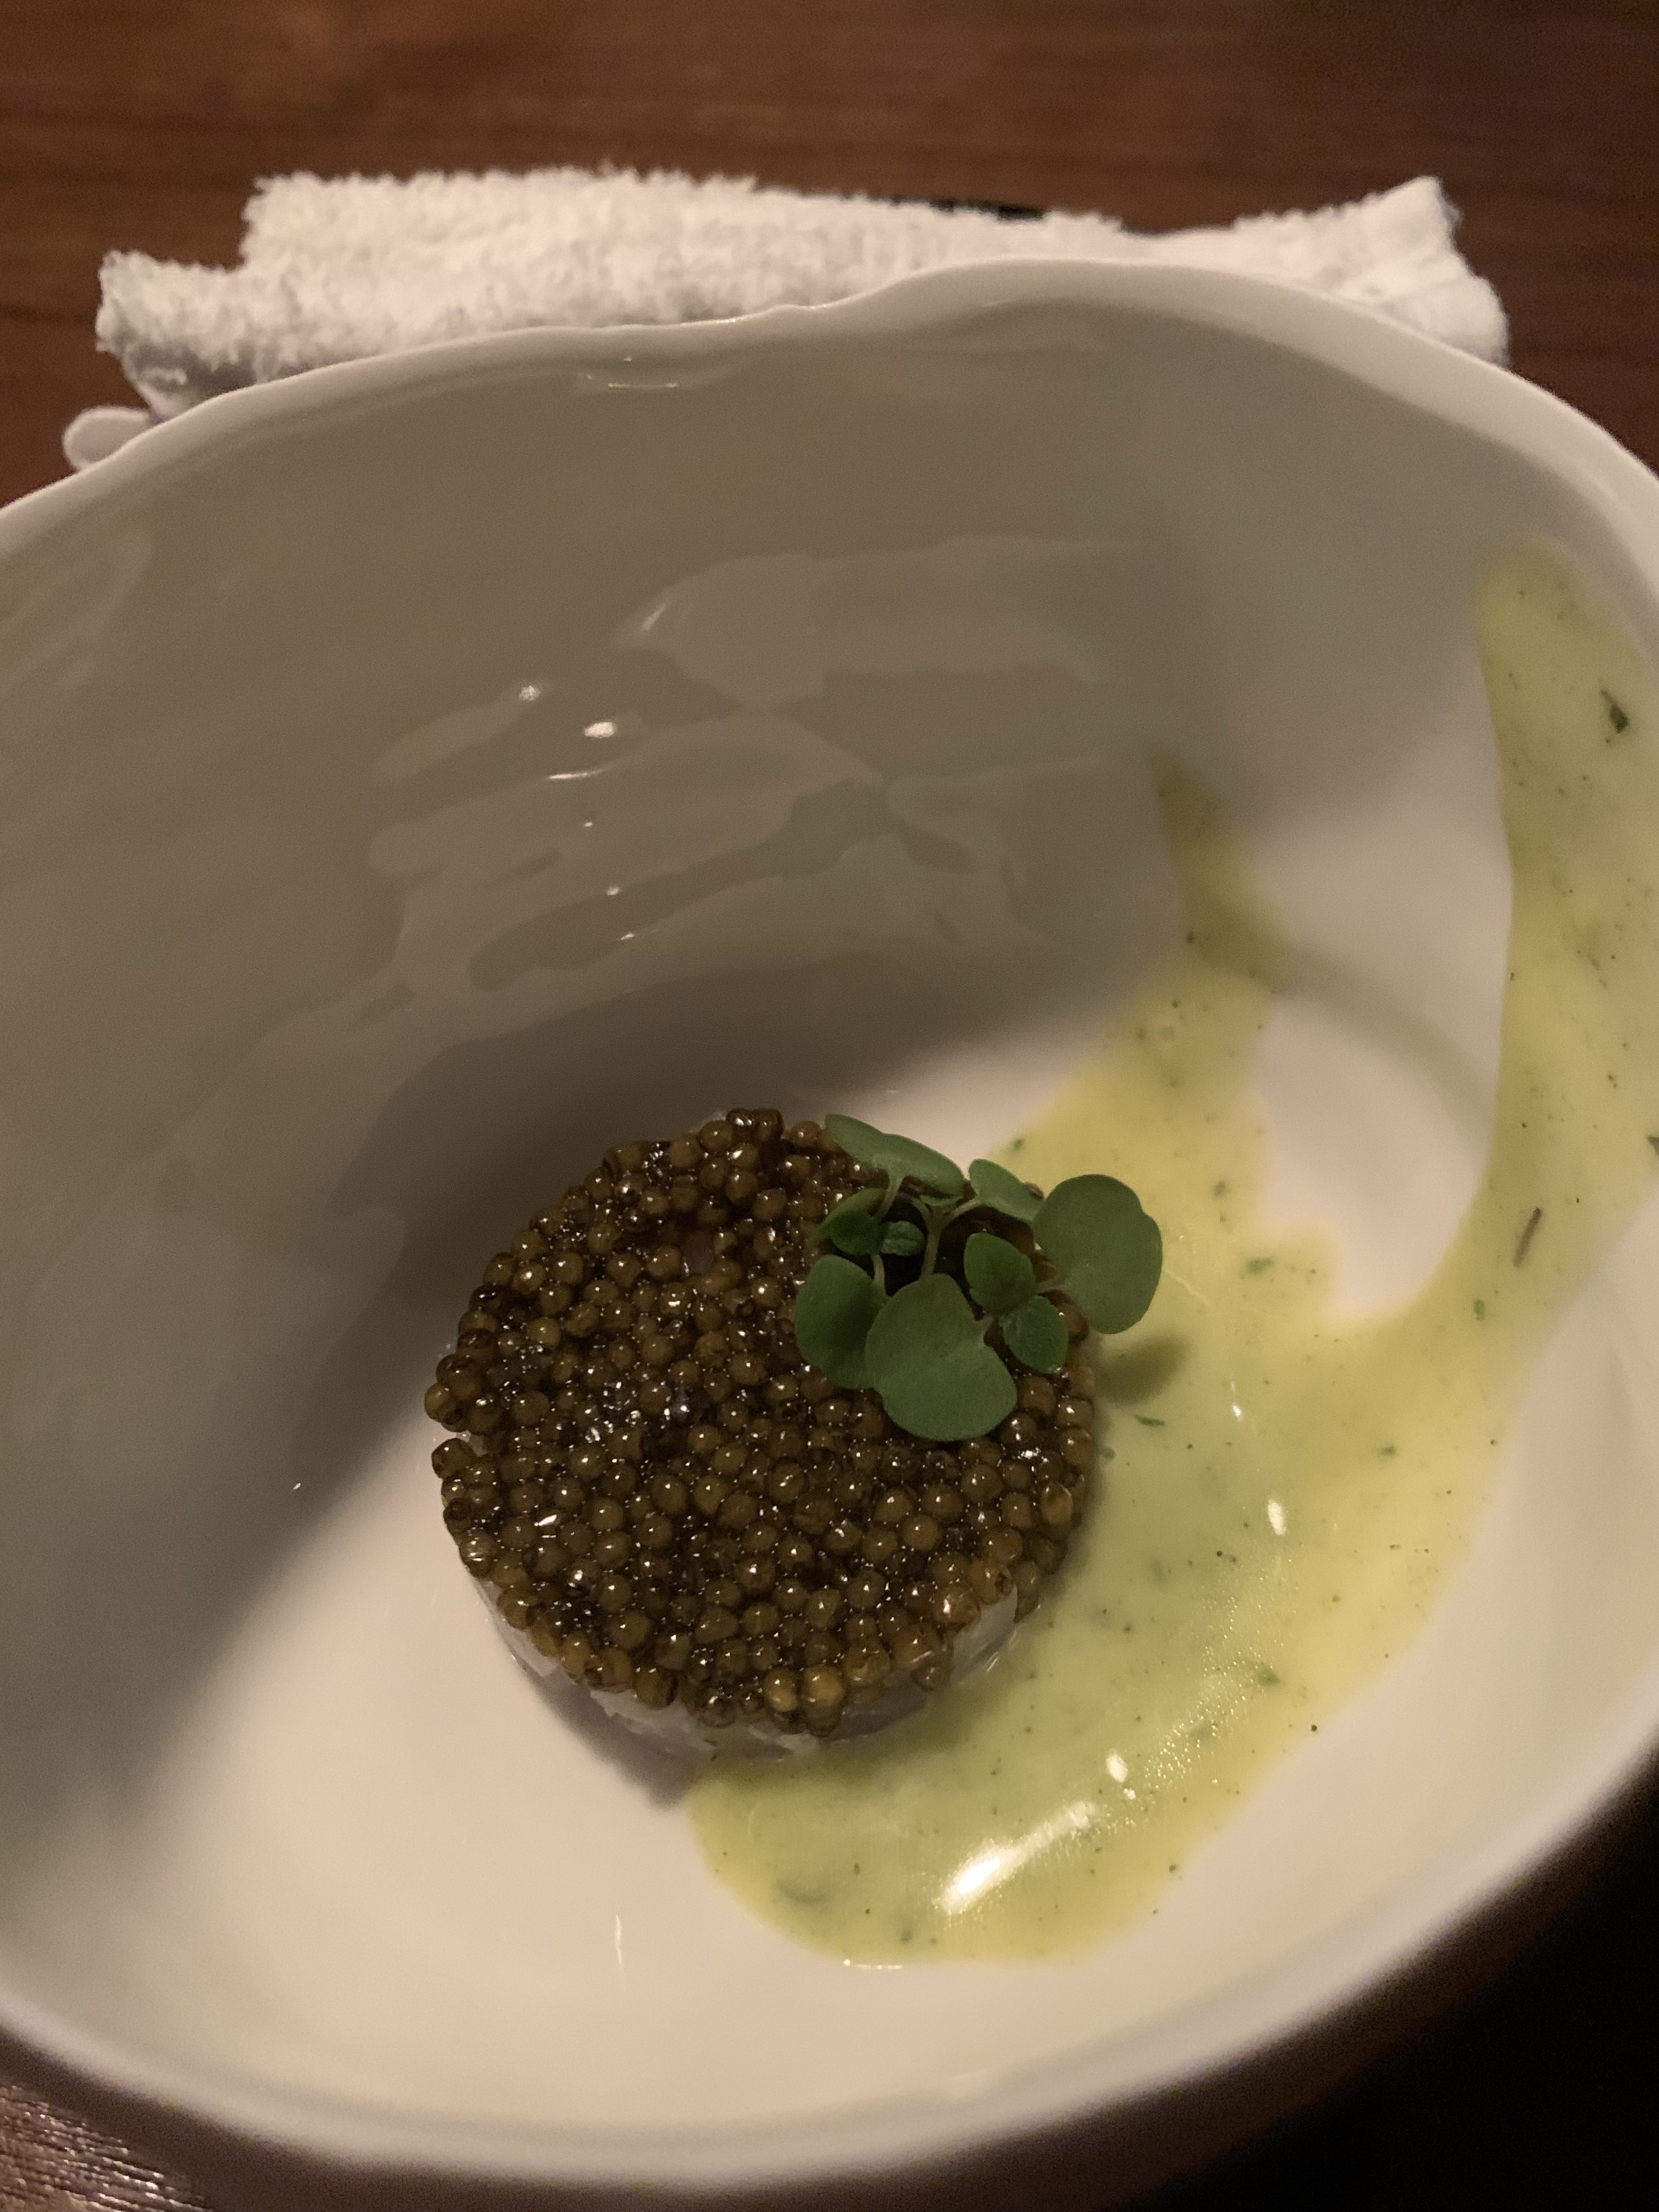 Caviar formed into a perfect disc, with some light green sauce beneath it